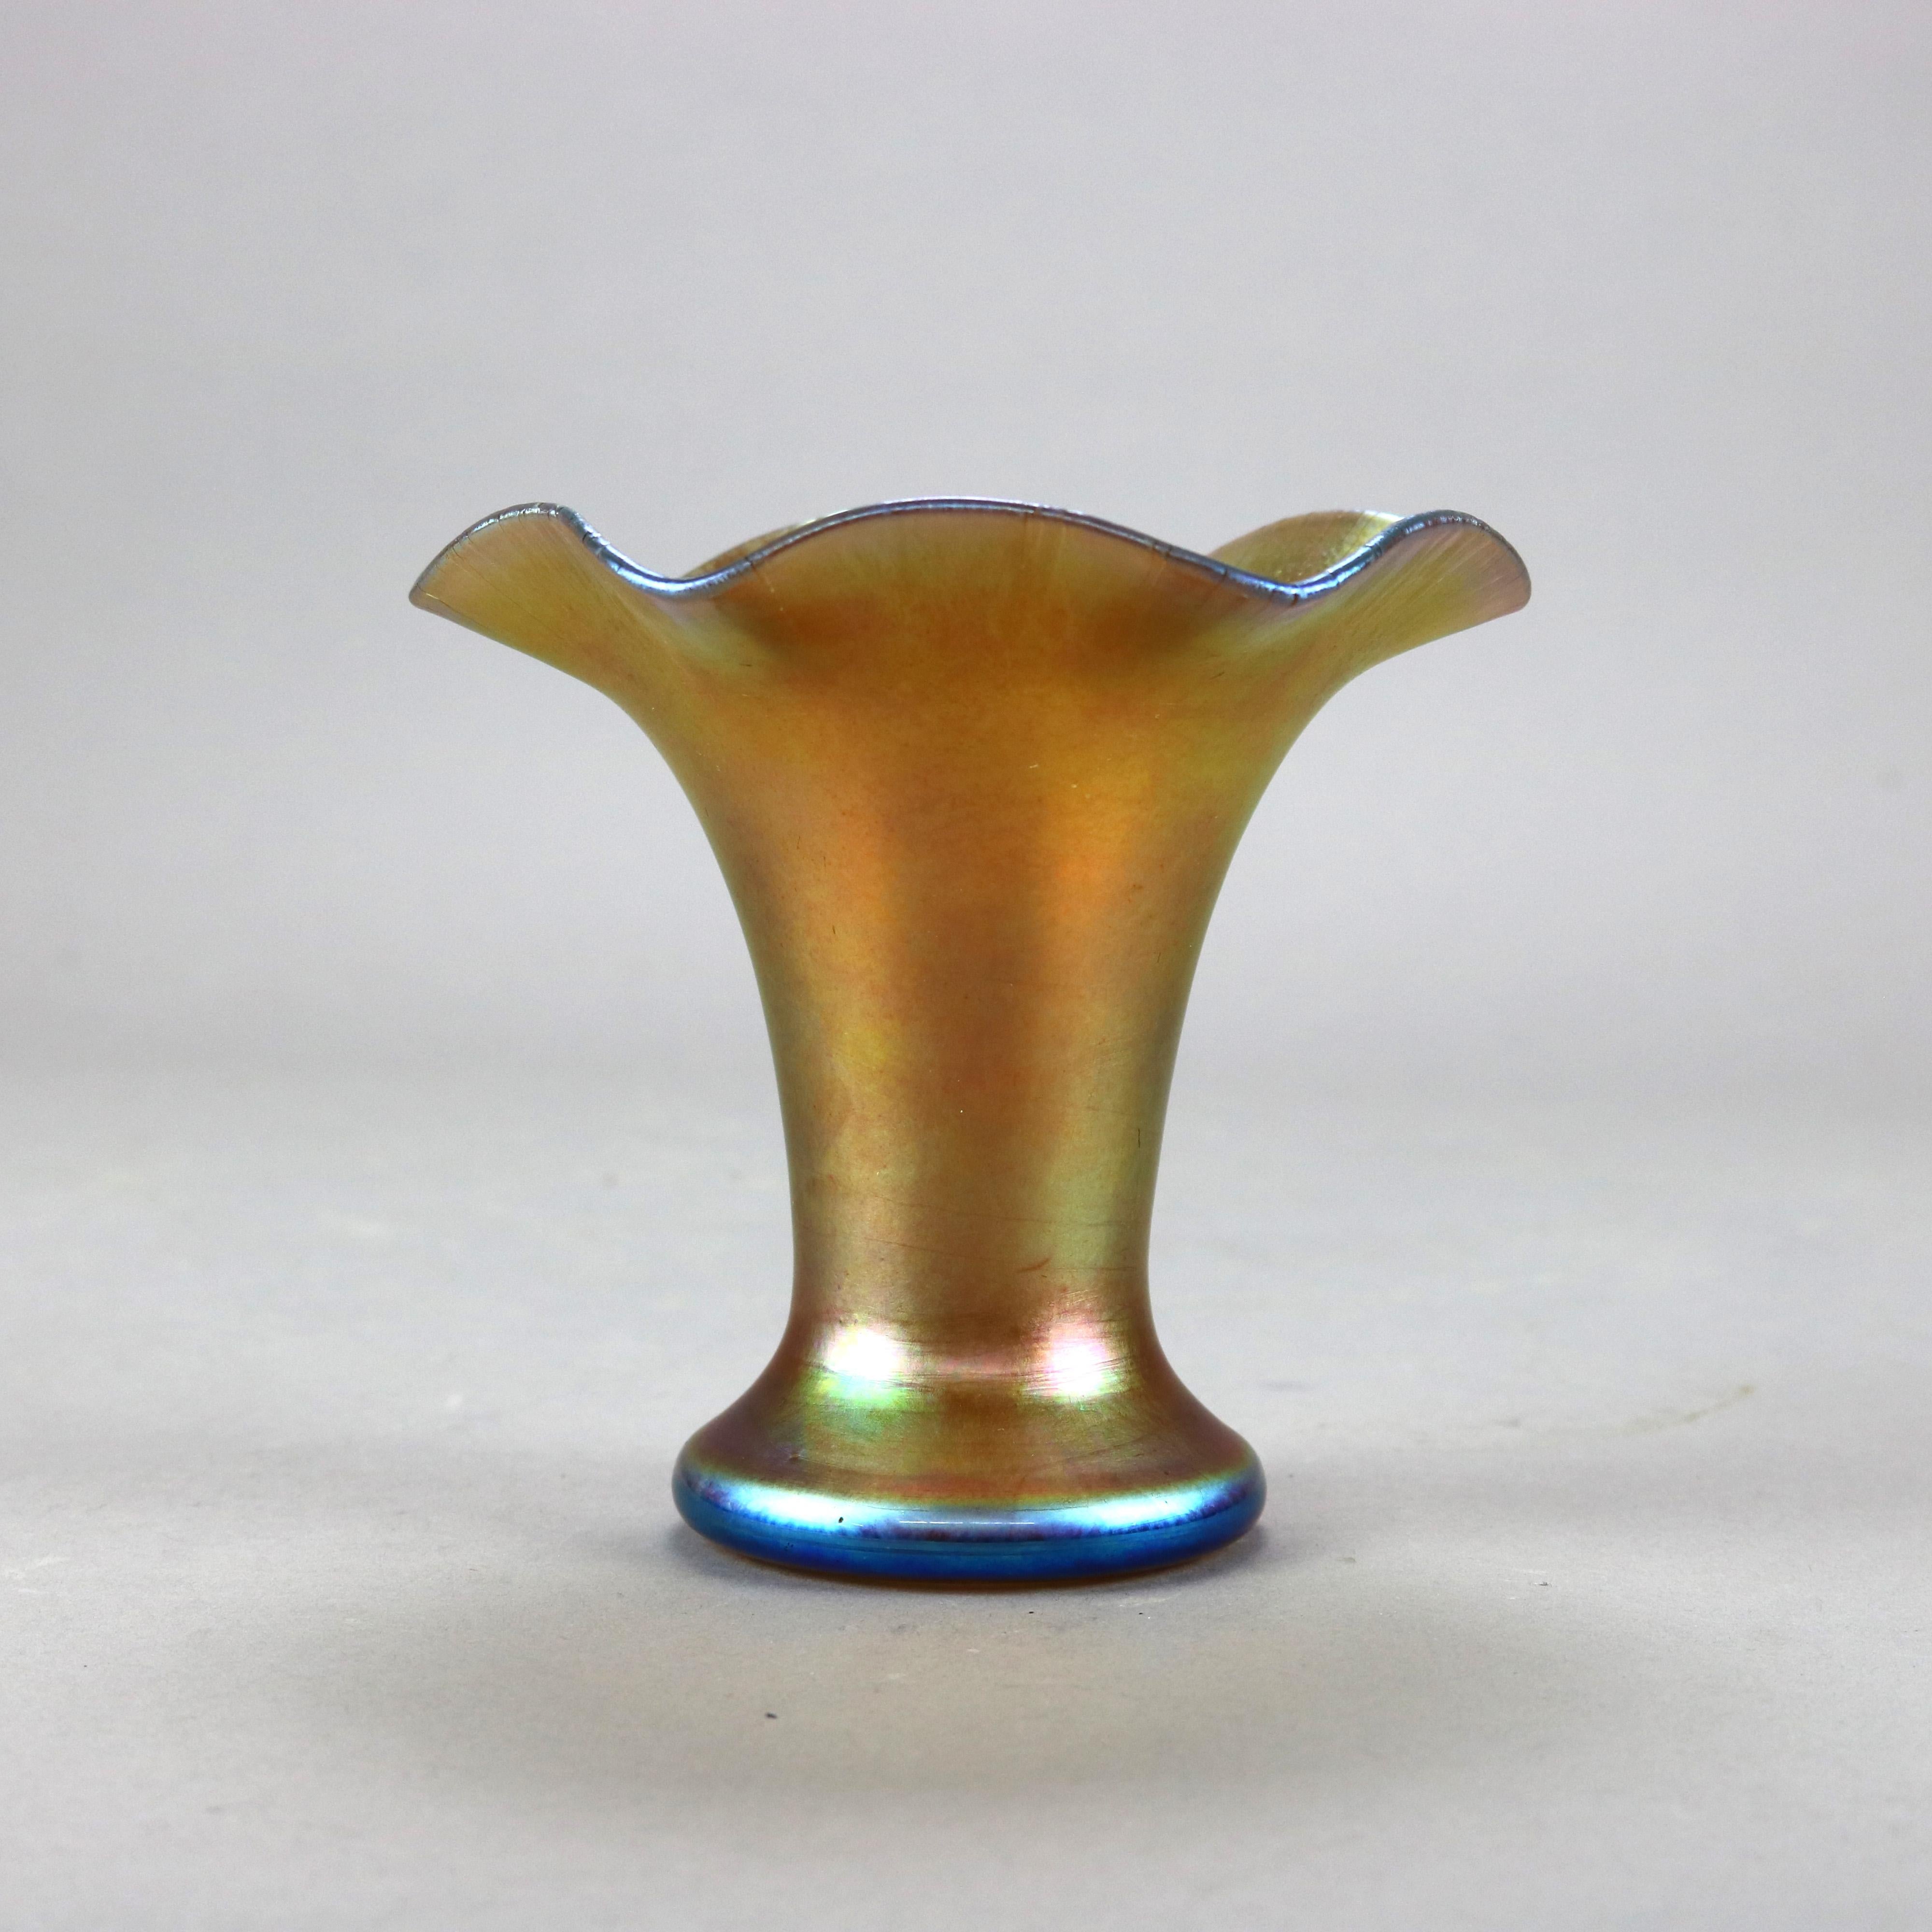 An antique vase by Steuben offers gold aurene art glass construction in flared and squat form with ruffled rim, etched Aurene with Rockwell Museum label, c1920

Measures - 5.5